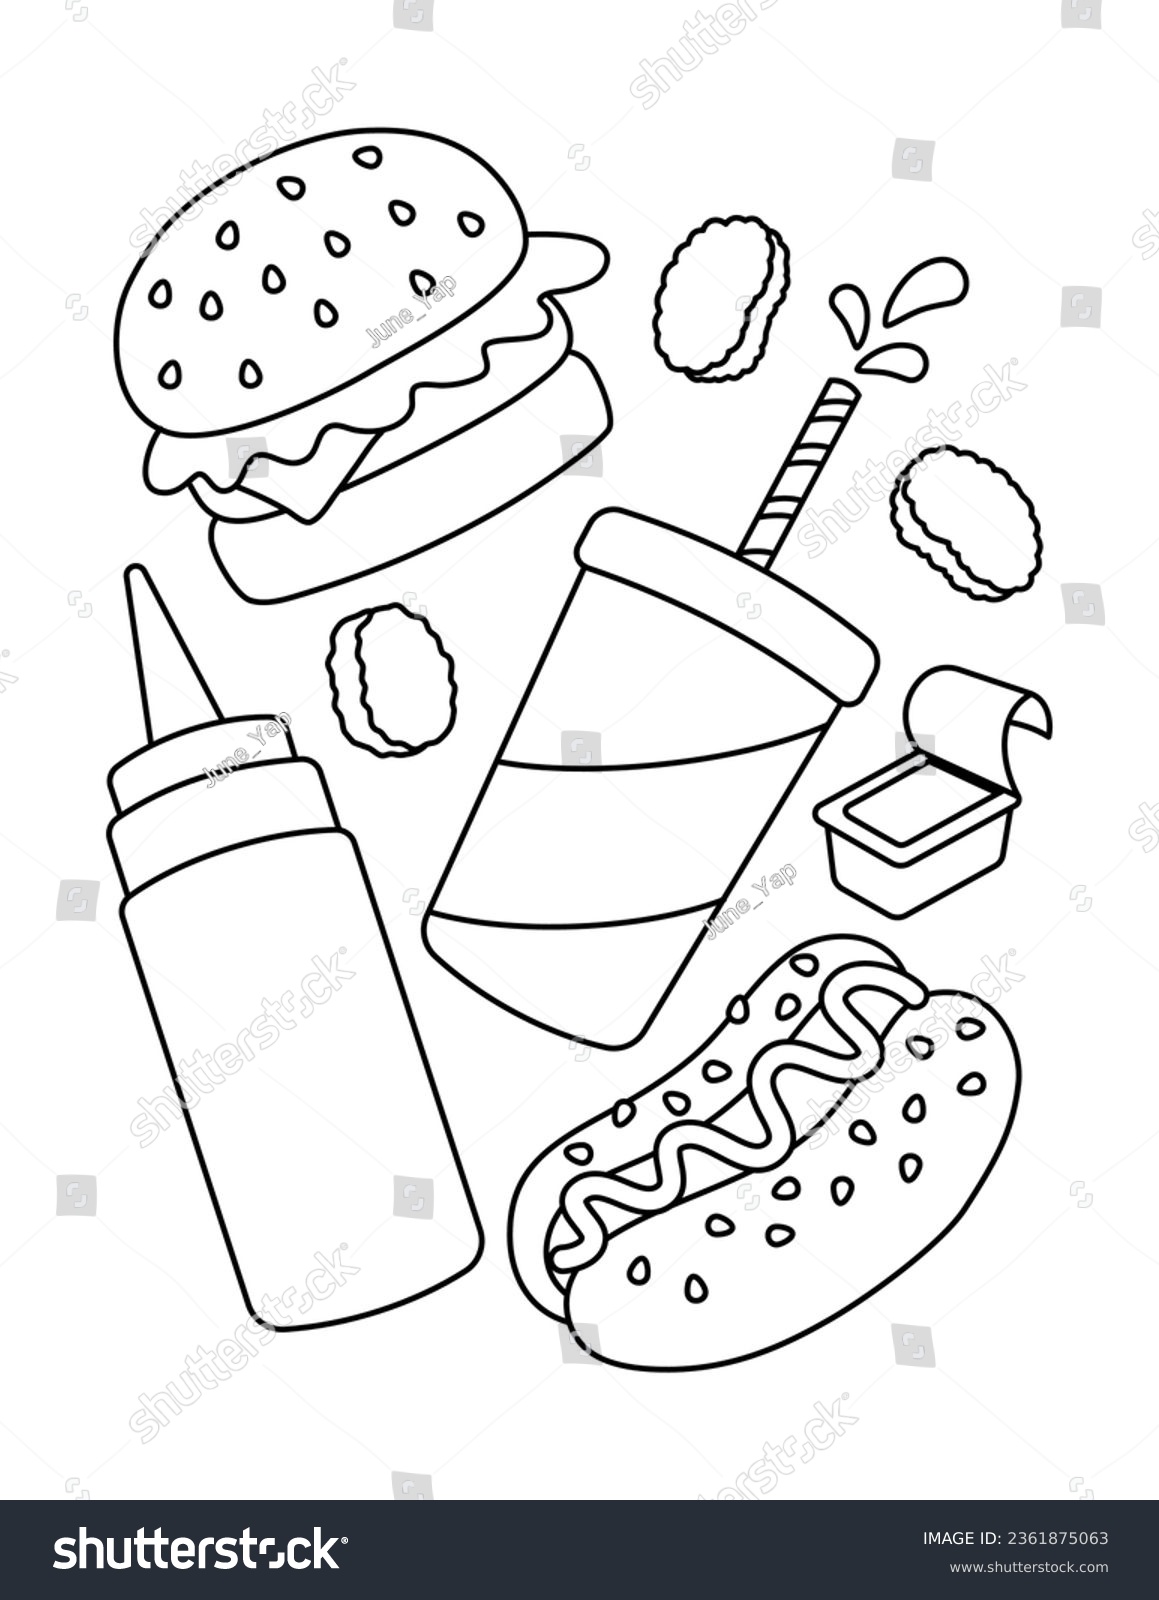 Food coloring pages stock photos